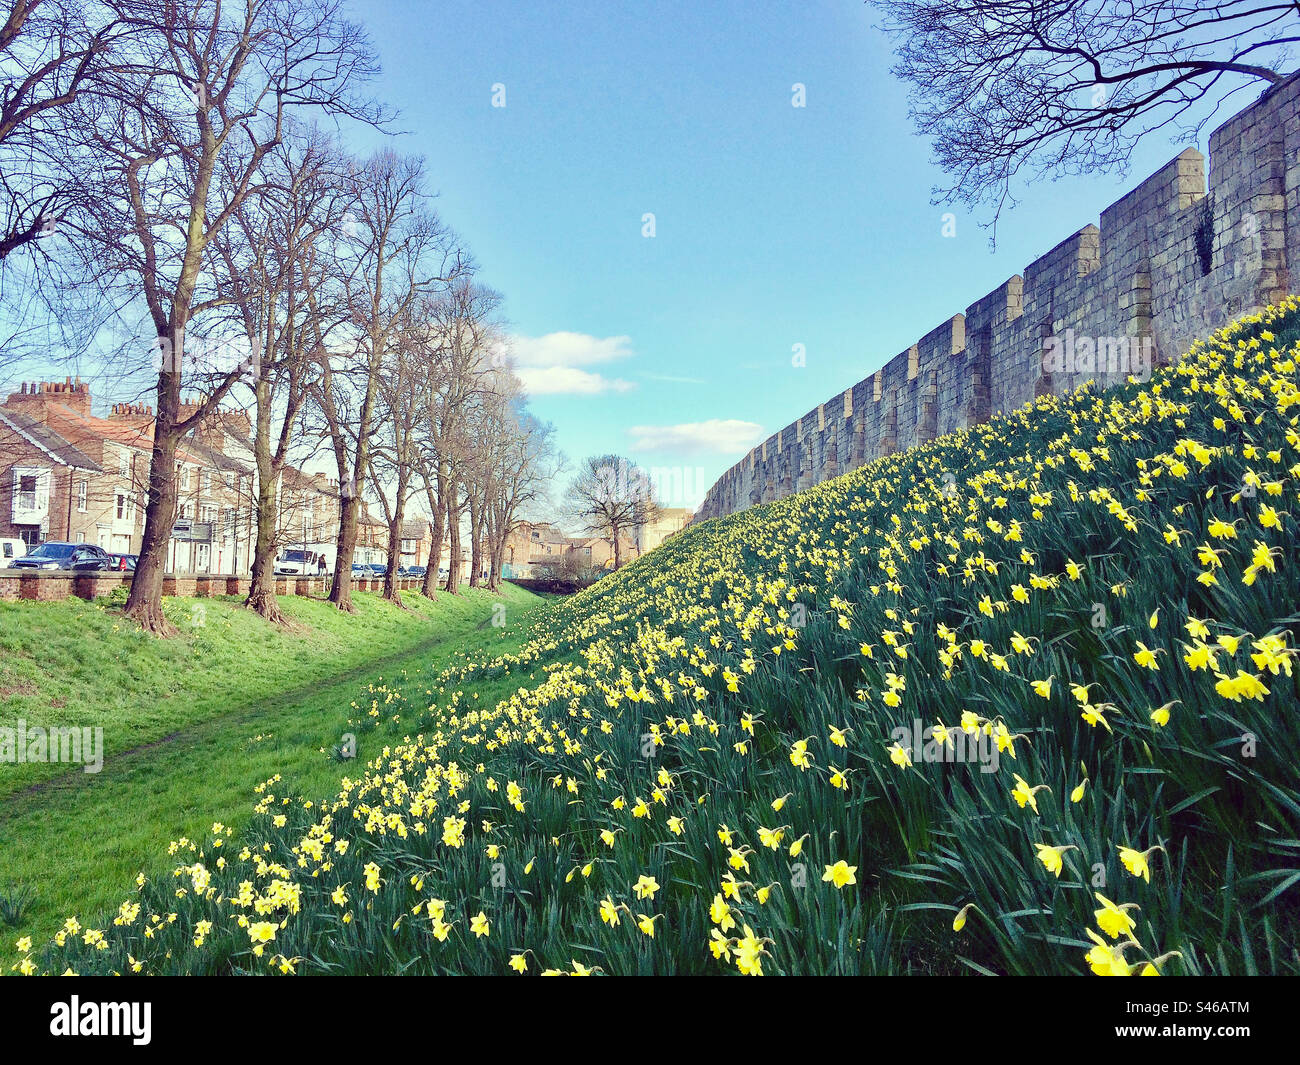 Spring Daffodils blooming under the city walls in York, UK Stock Photo